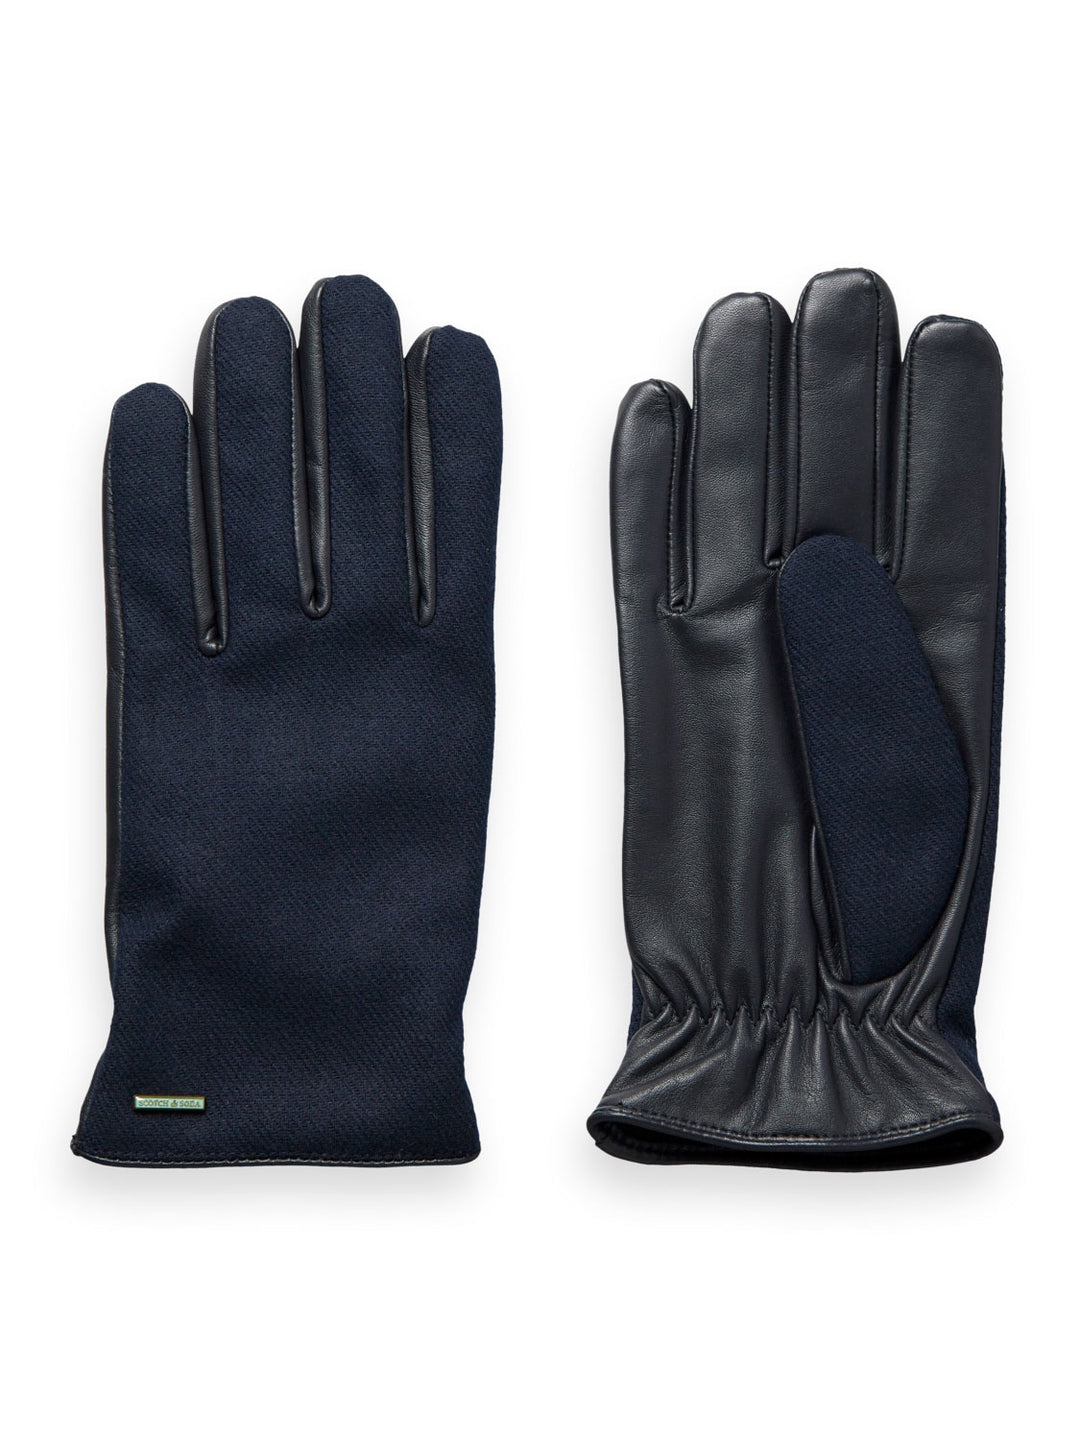 Scotch & Soda - Leather and Wool Gloves in Night | Buster McGee